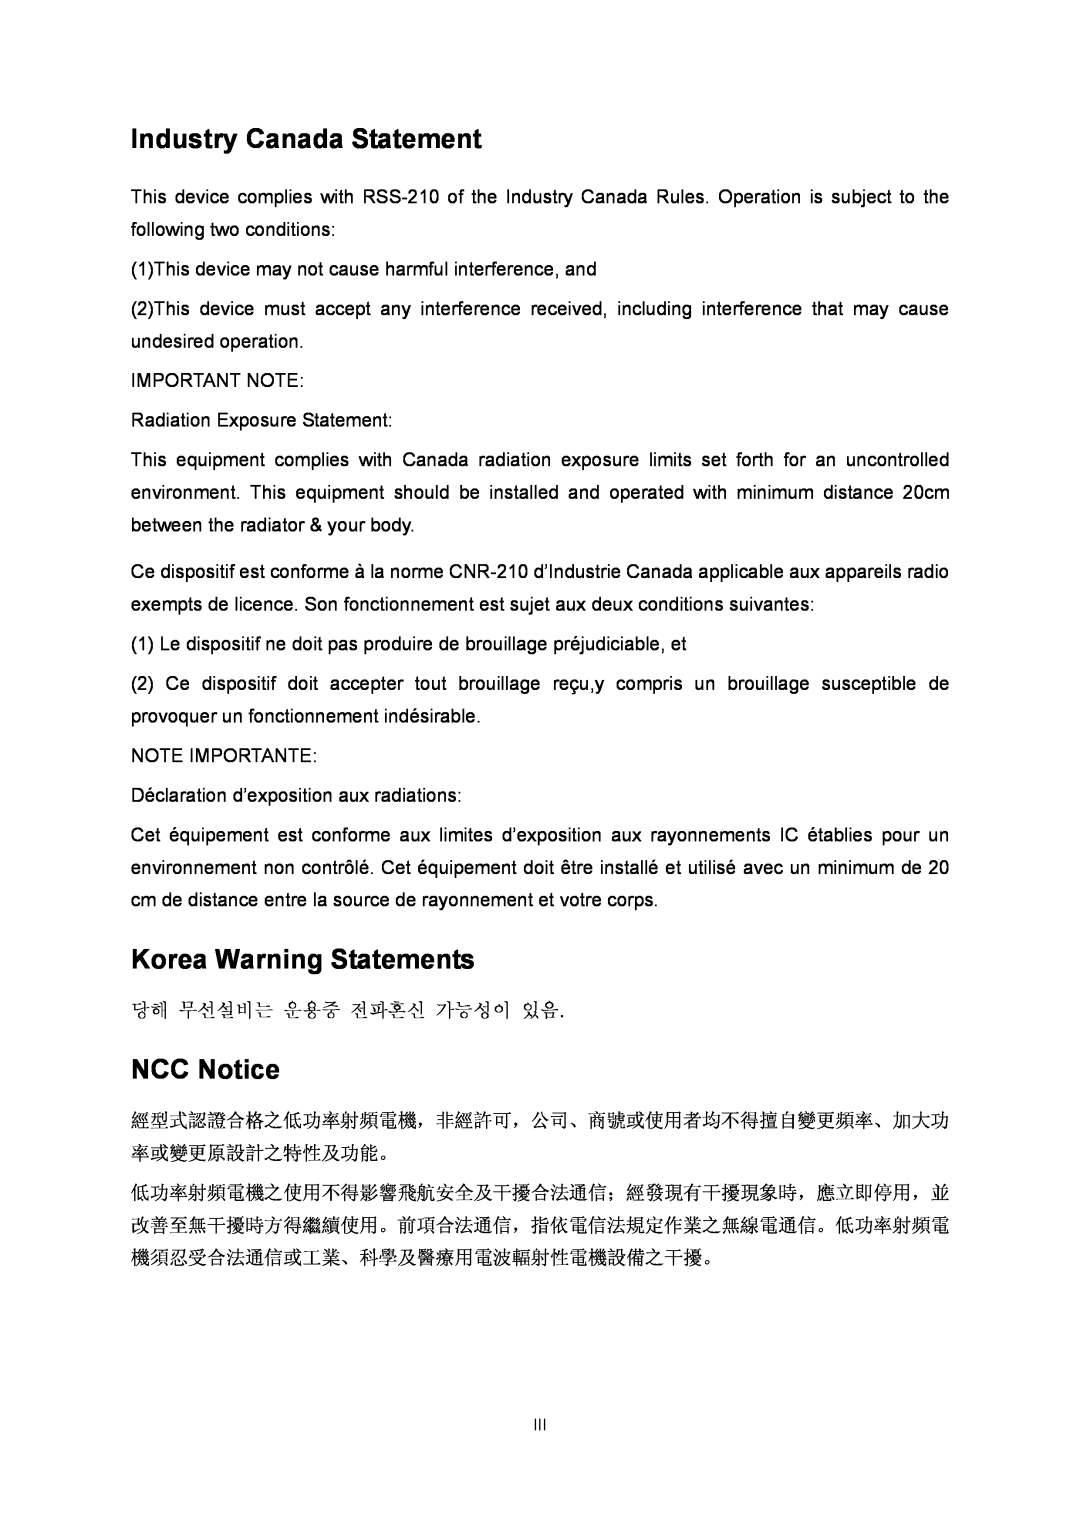 TP-Link TL-WR940N manual Industry Canada Statement, Korea Warning Statements, NCC Notice 